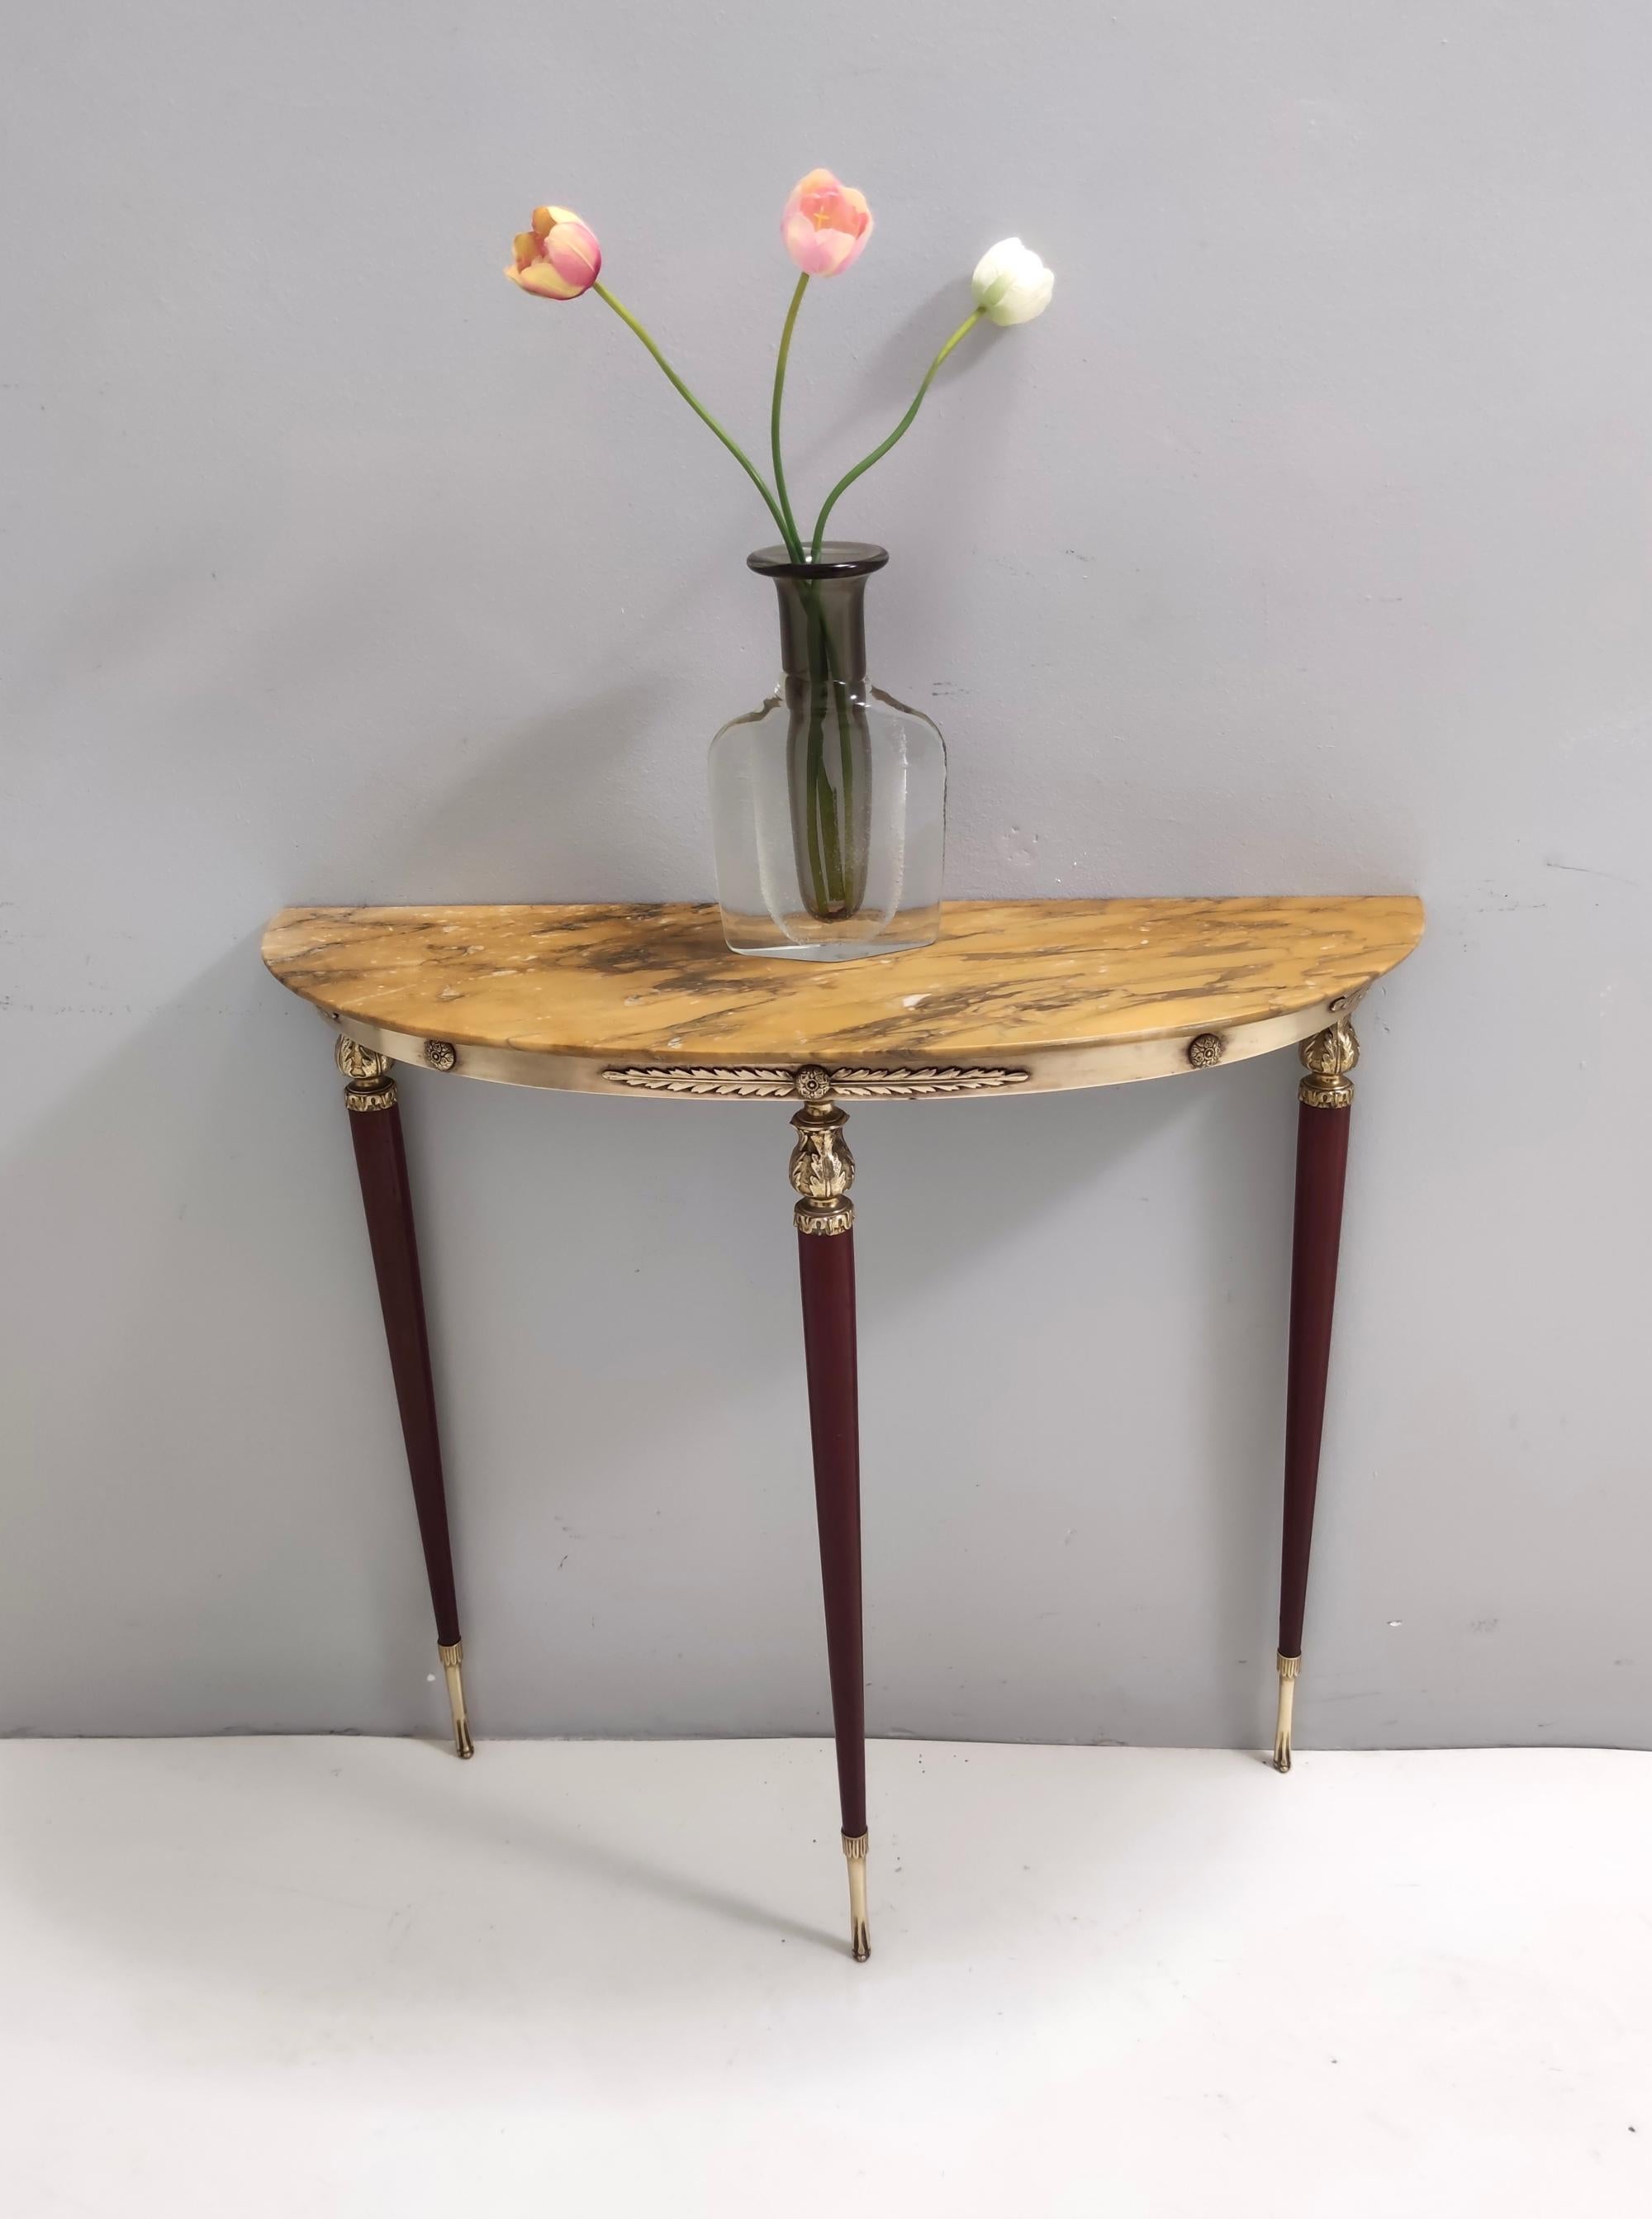 Made in Italy, 1950s. 
This console features a lacquered beech frame, brass details and feet caps and a yellow marble top.
It might show slight traces of use since it's vintage, but it can be considered as in excellent original condition and ready